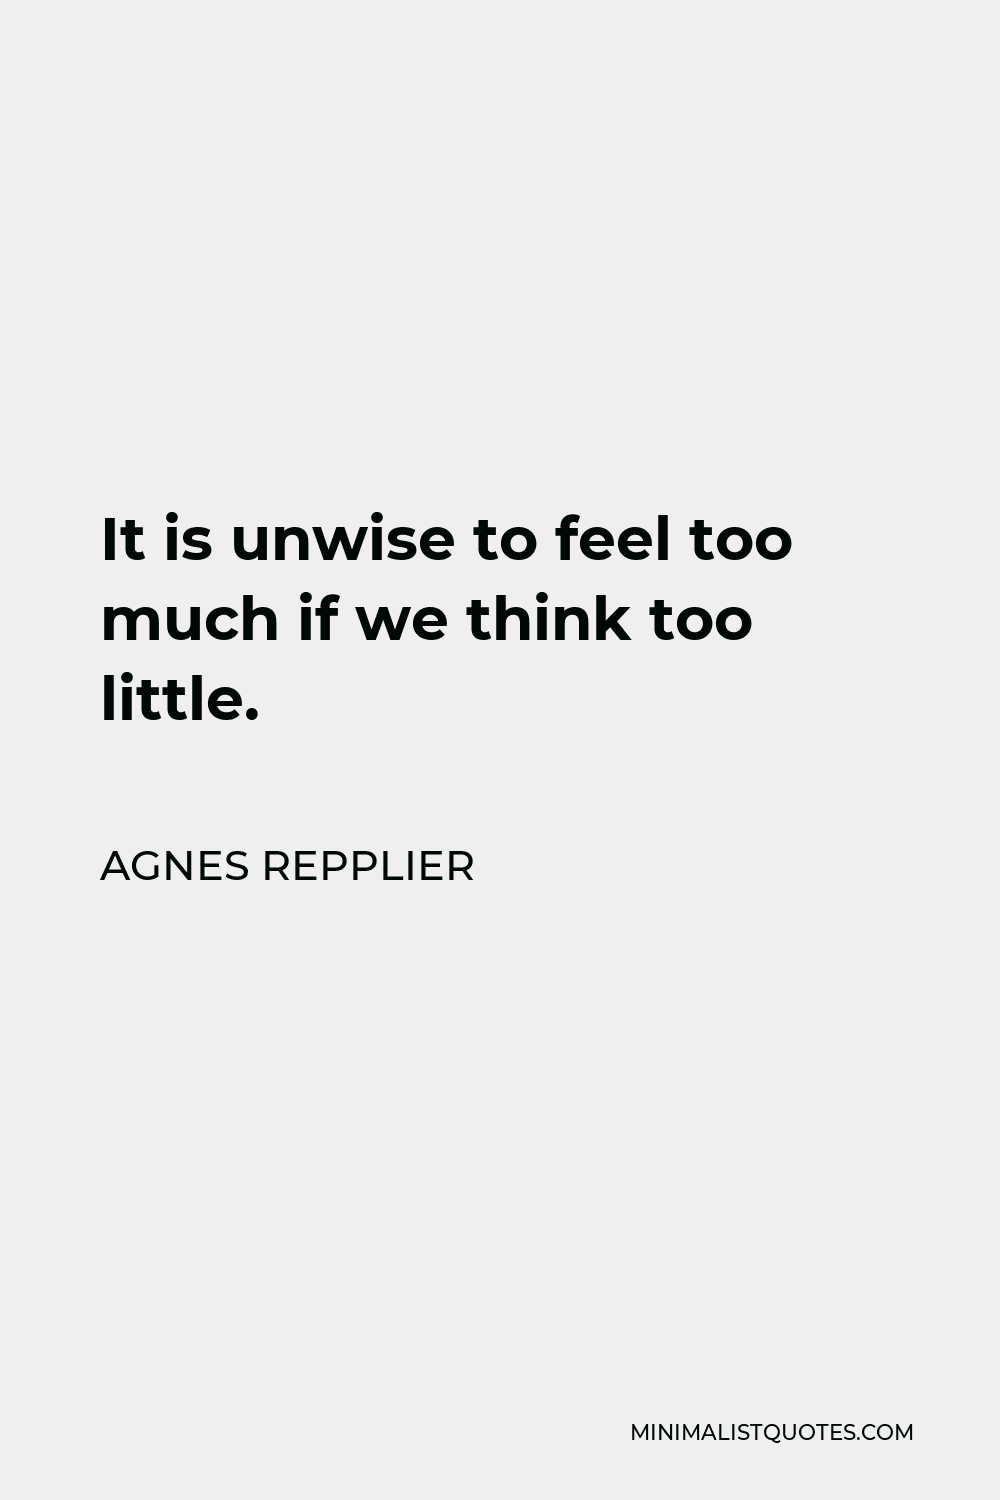 Agnes Repplier Quote - It is unwise to feel too much if we think too little.